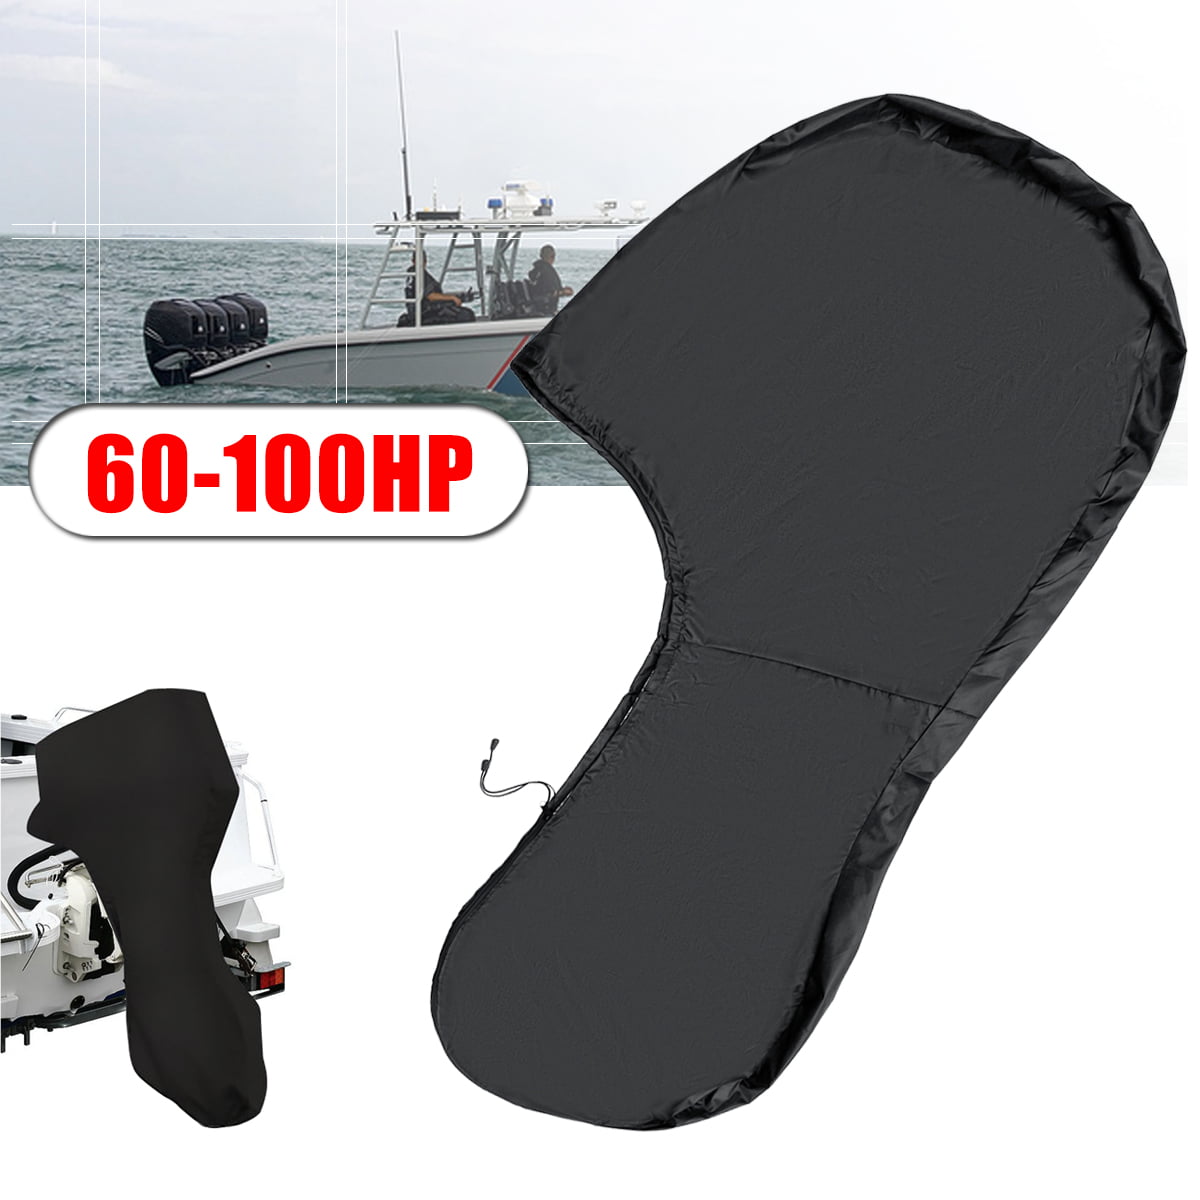 Boat Motor Covers, Outboard Motor Cover with 420D Oxford Fabric Extra PVC  Coating,Waterproof Outboard Engine Covers Fit for Motor 60-100 HP